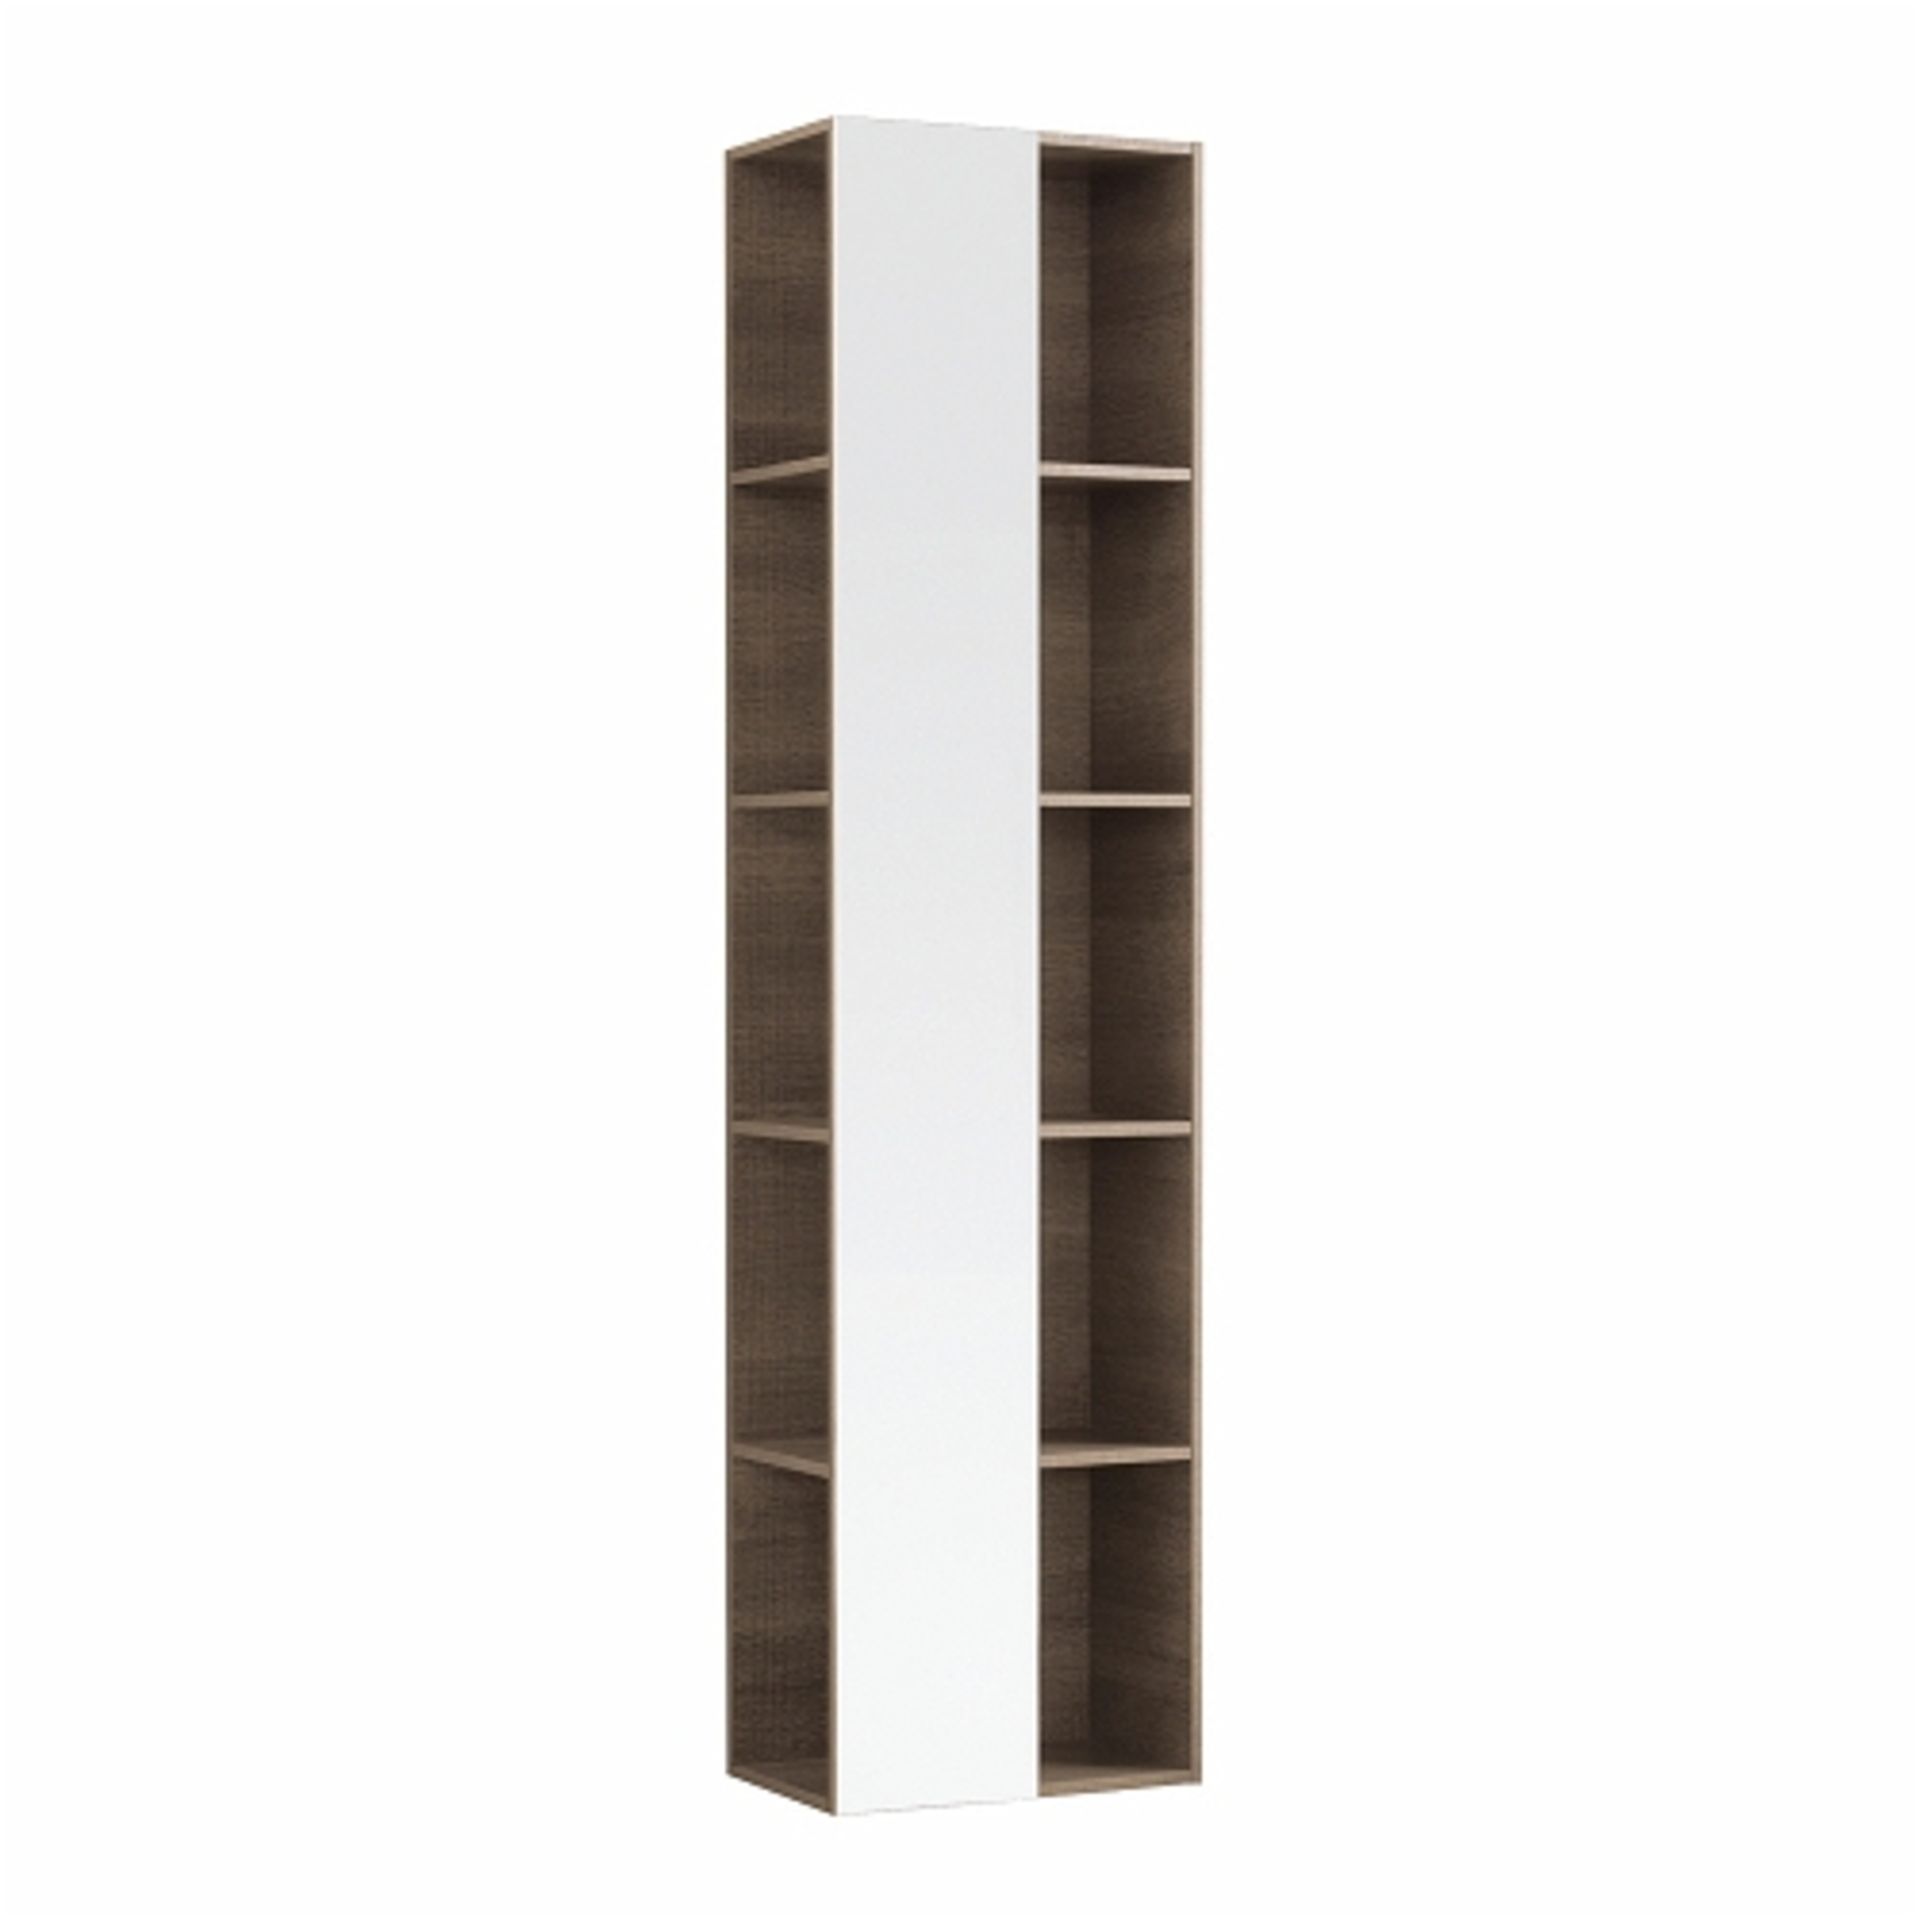 (XL140) Keramag Citterio Grey/Brown Shelves with Mirror Tall Cabinet. RRP £865.99. Wood struc...( - Image 3 of 3